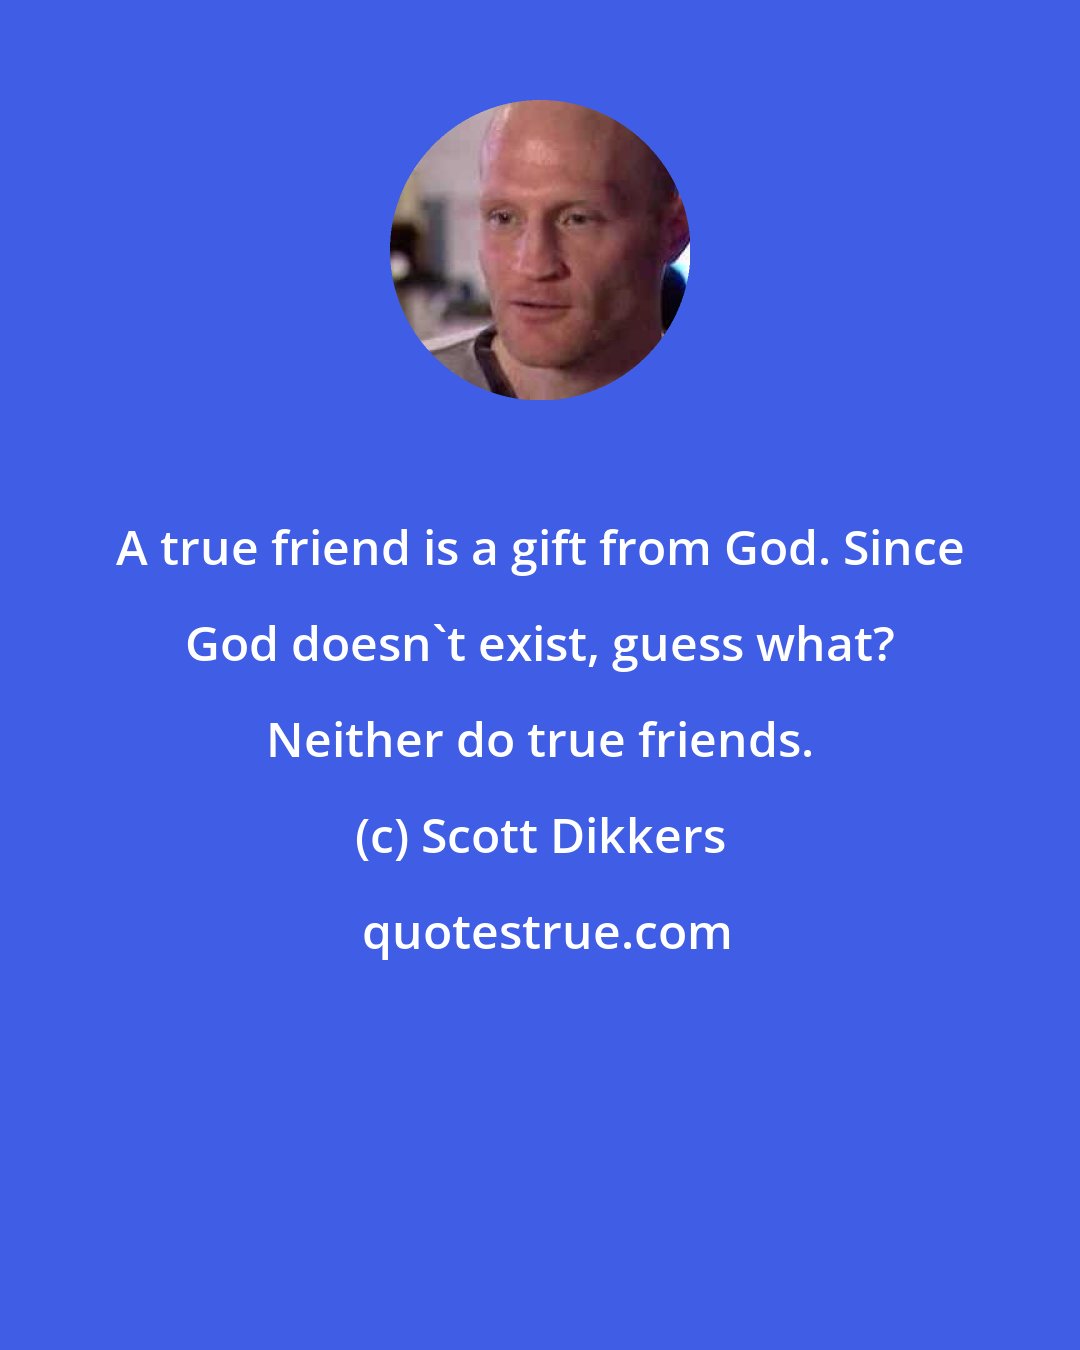 Scott Dikkers: A true friend is a gift from God. Since God doesn't exist, guess what? Neither do true friends.